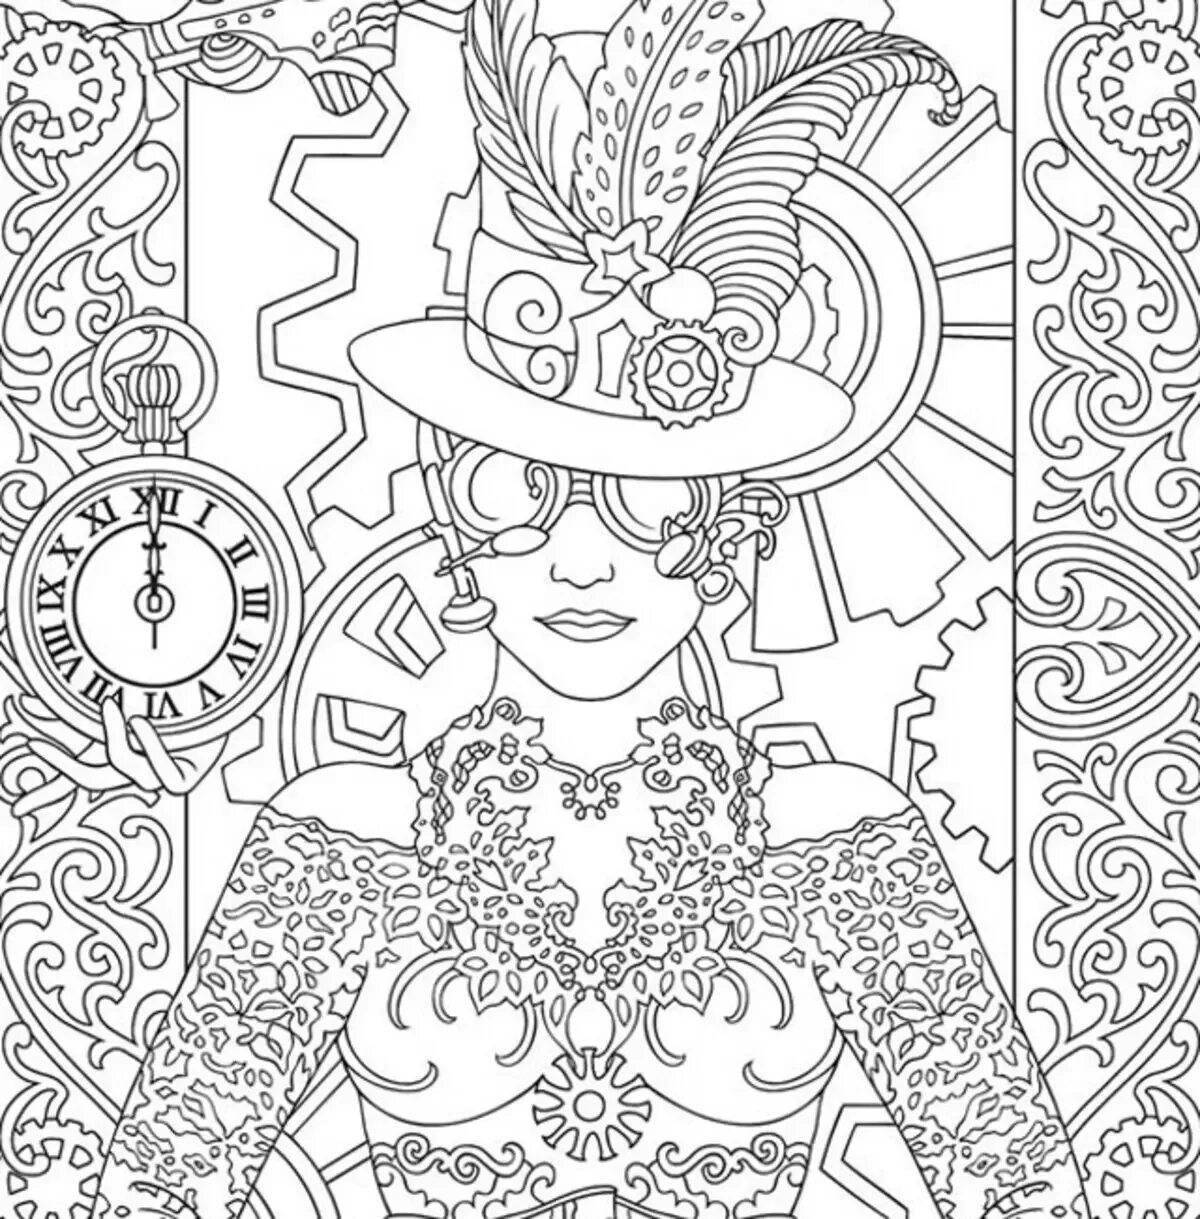 Excellent coloring pages for adults